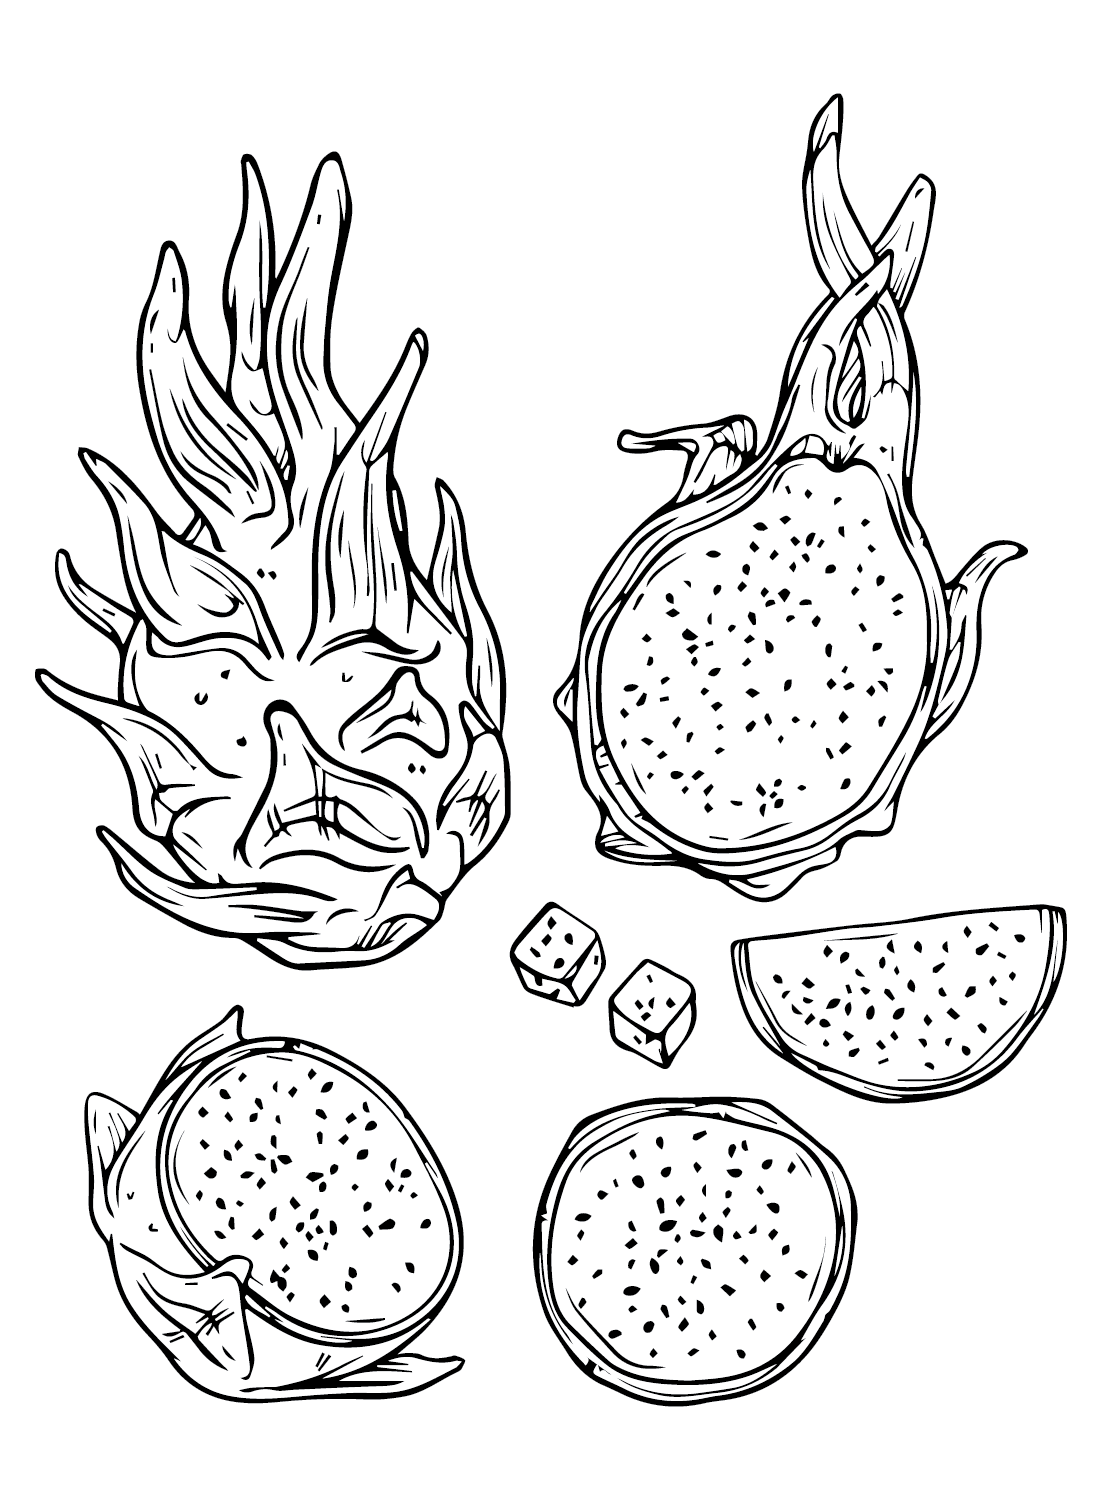 Dragon Fruit for Kids Coloring Page